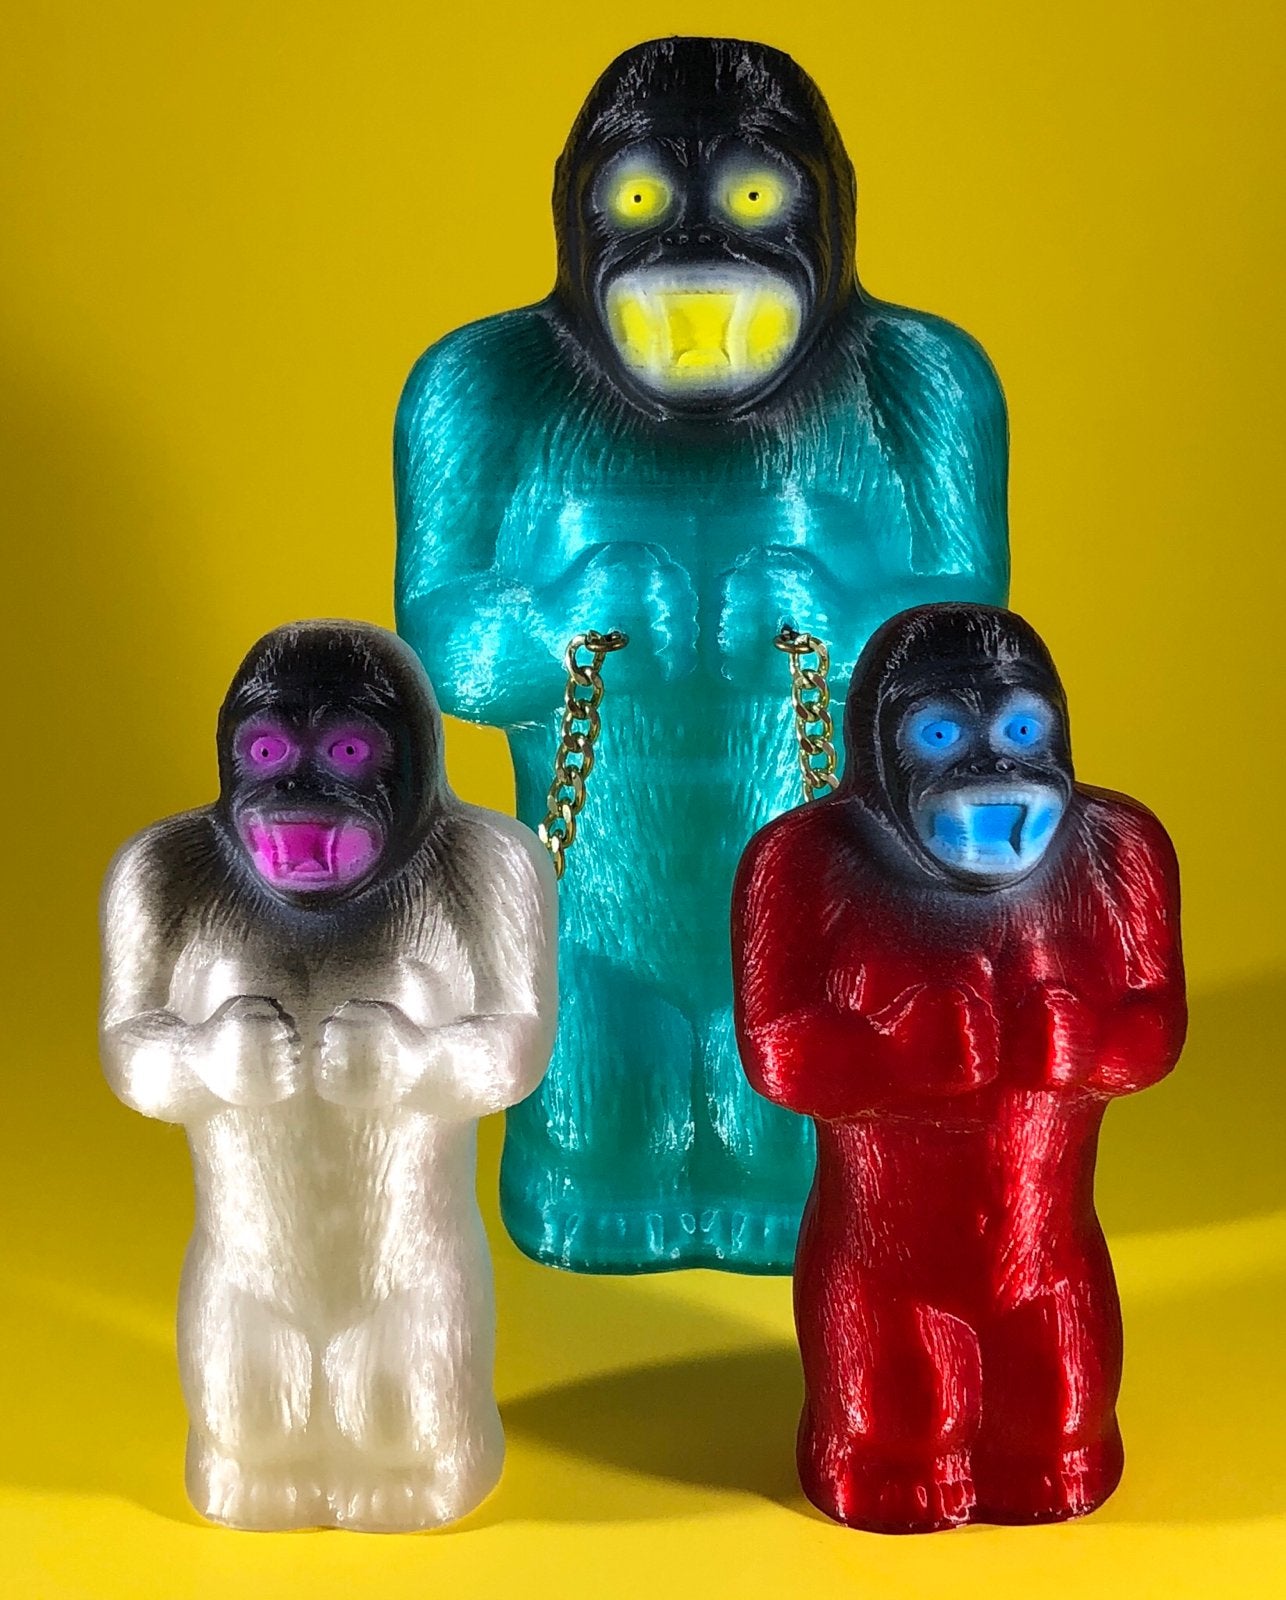 Blue, Red and White Translucent Chained Danger Apes